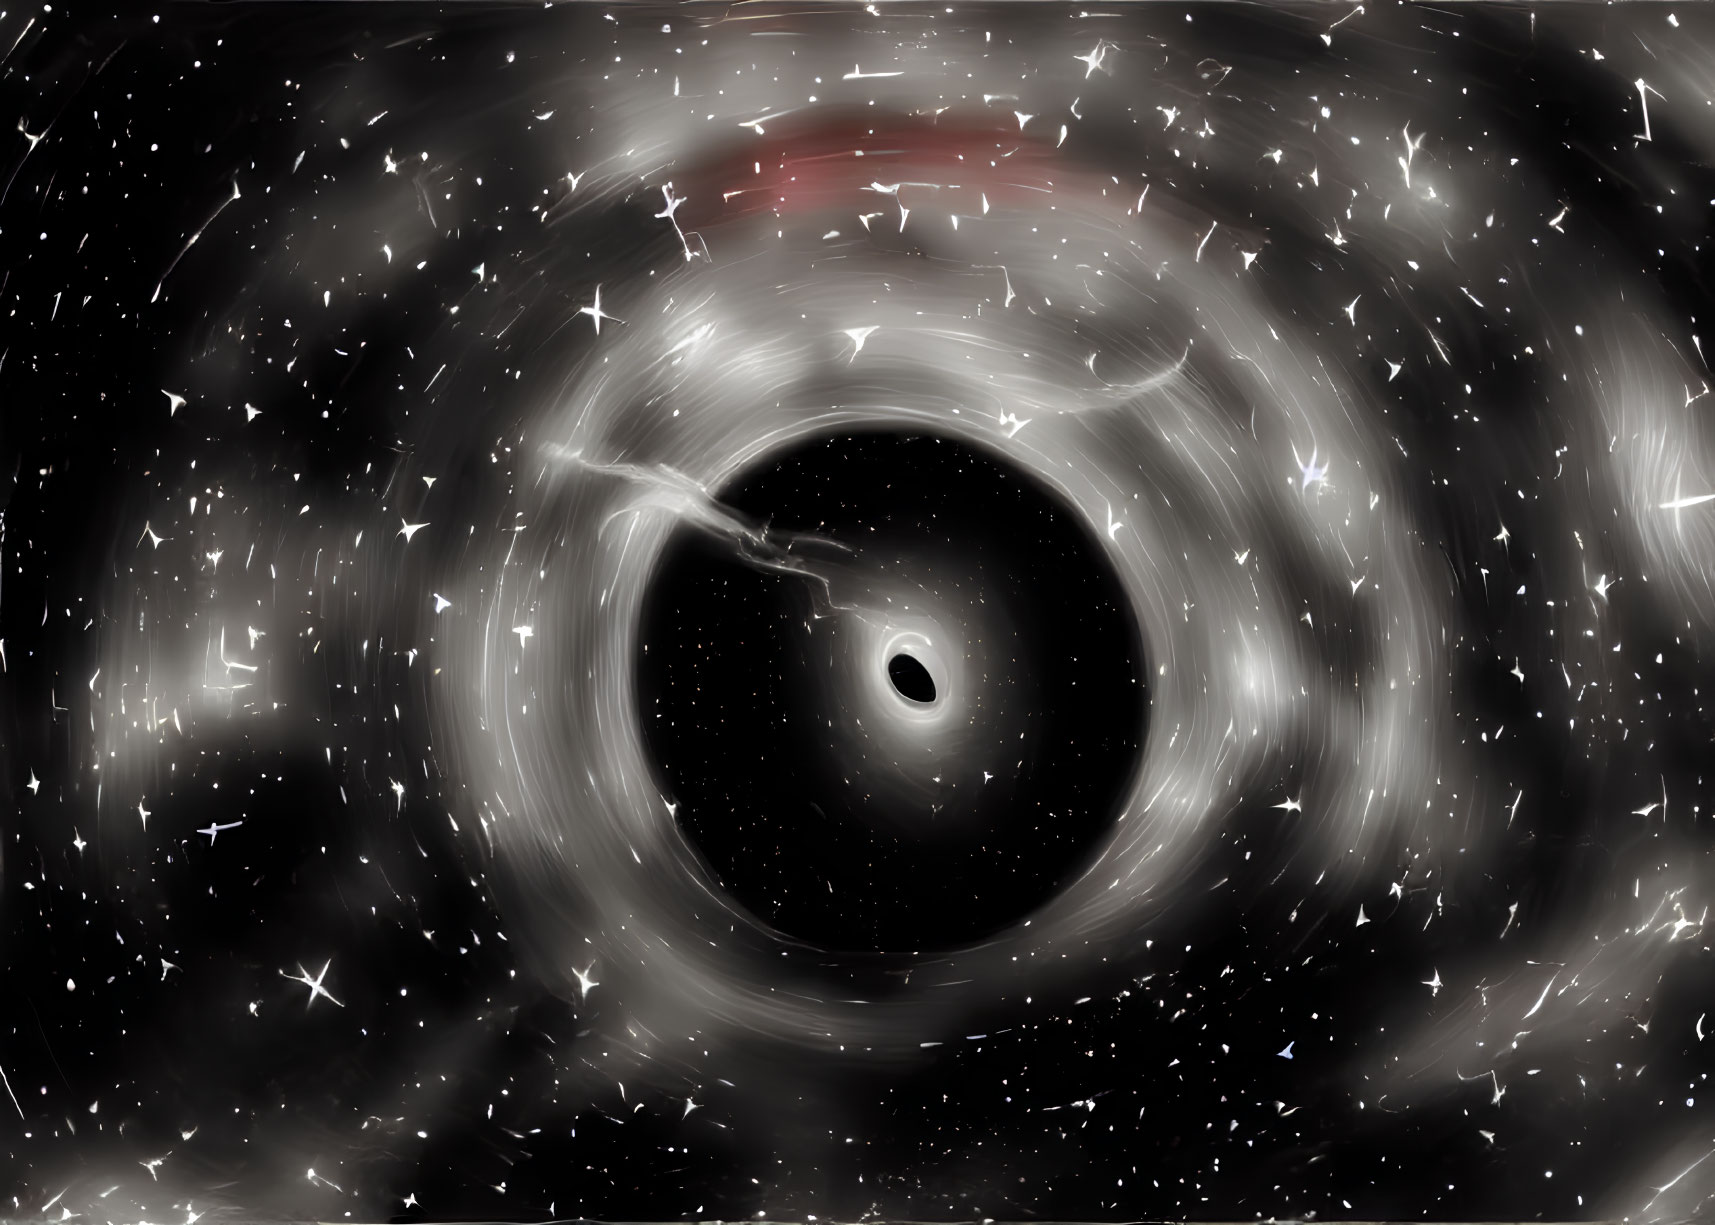 Digital Representation of Black Hole with Swirling Accretion Disk and Energy Jet